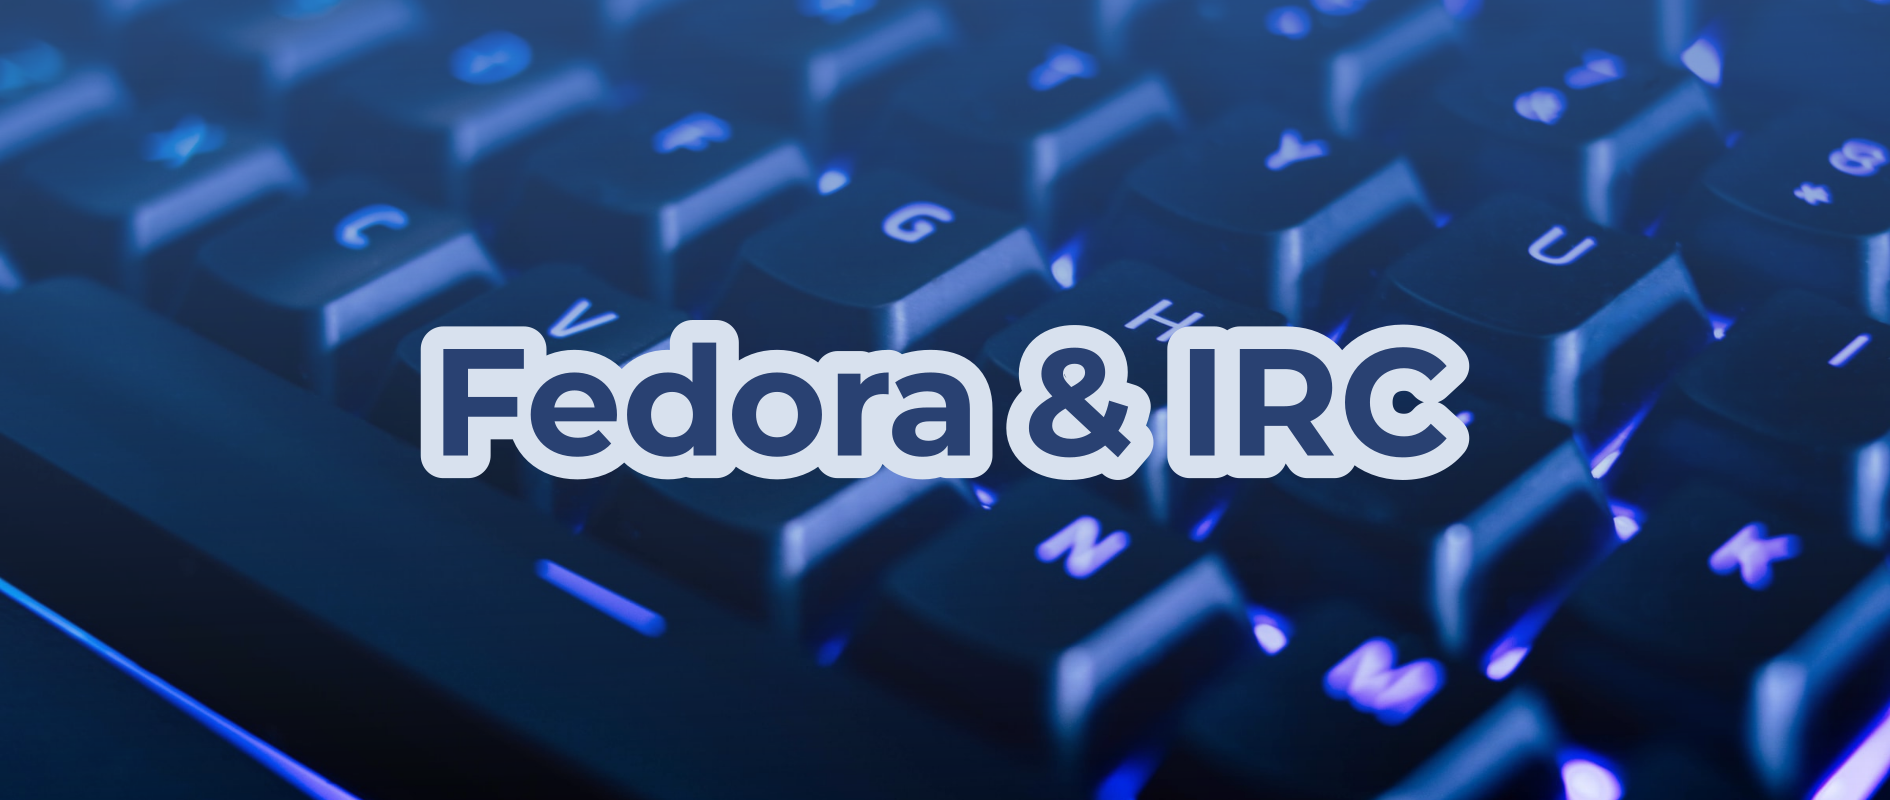 Since its beginnings, the Fedora Project has used the freenode IRC network for our project communications. Due to a variety of recent changes to that 